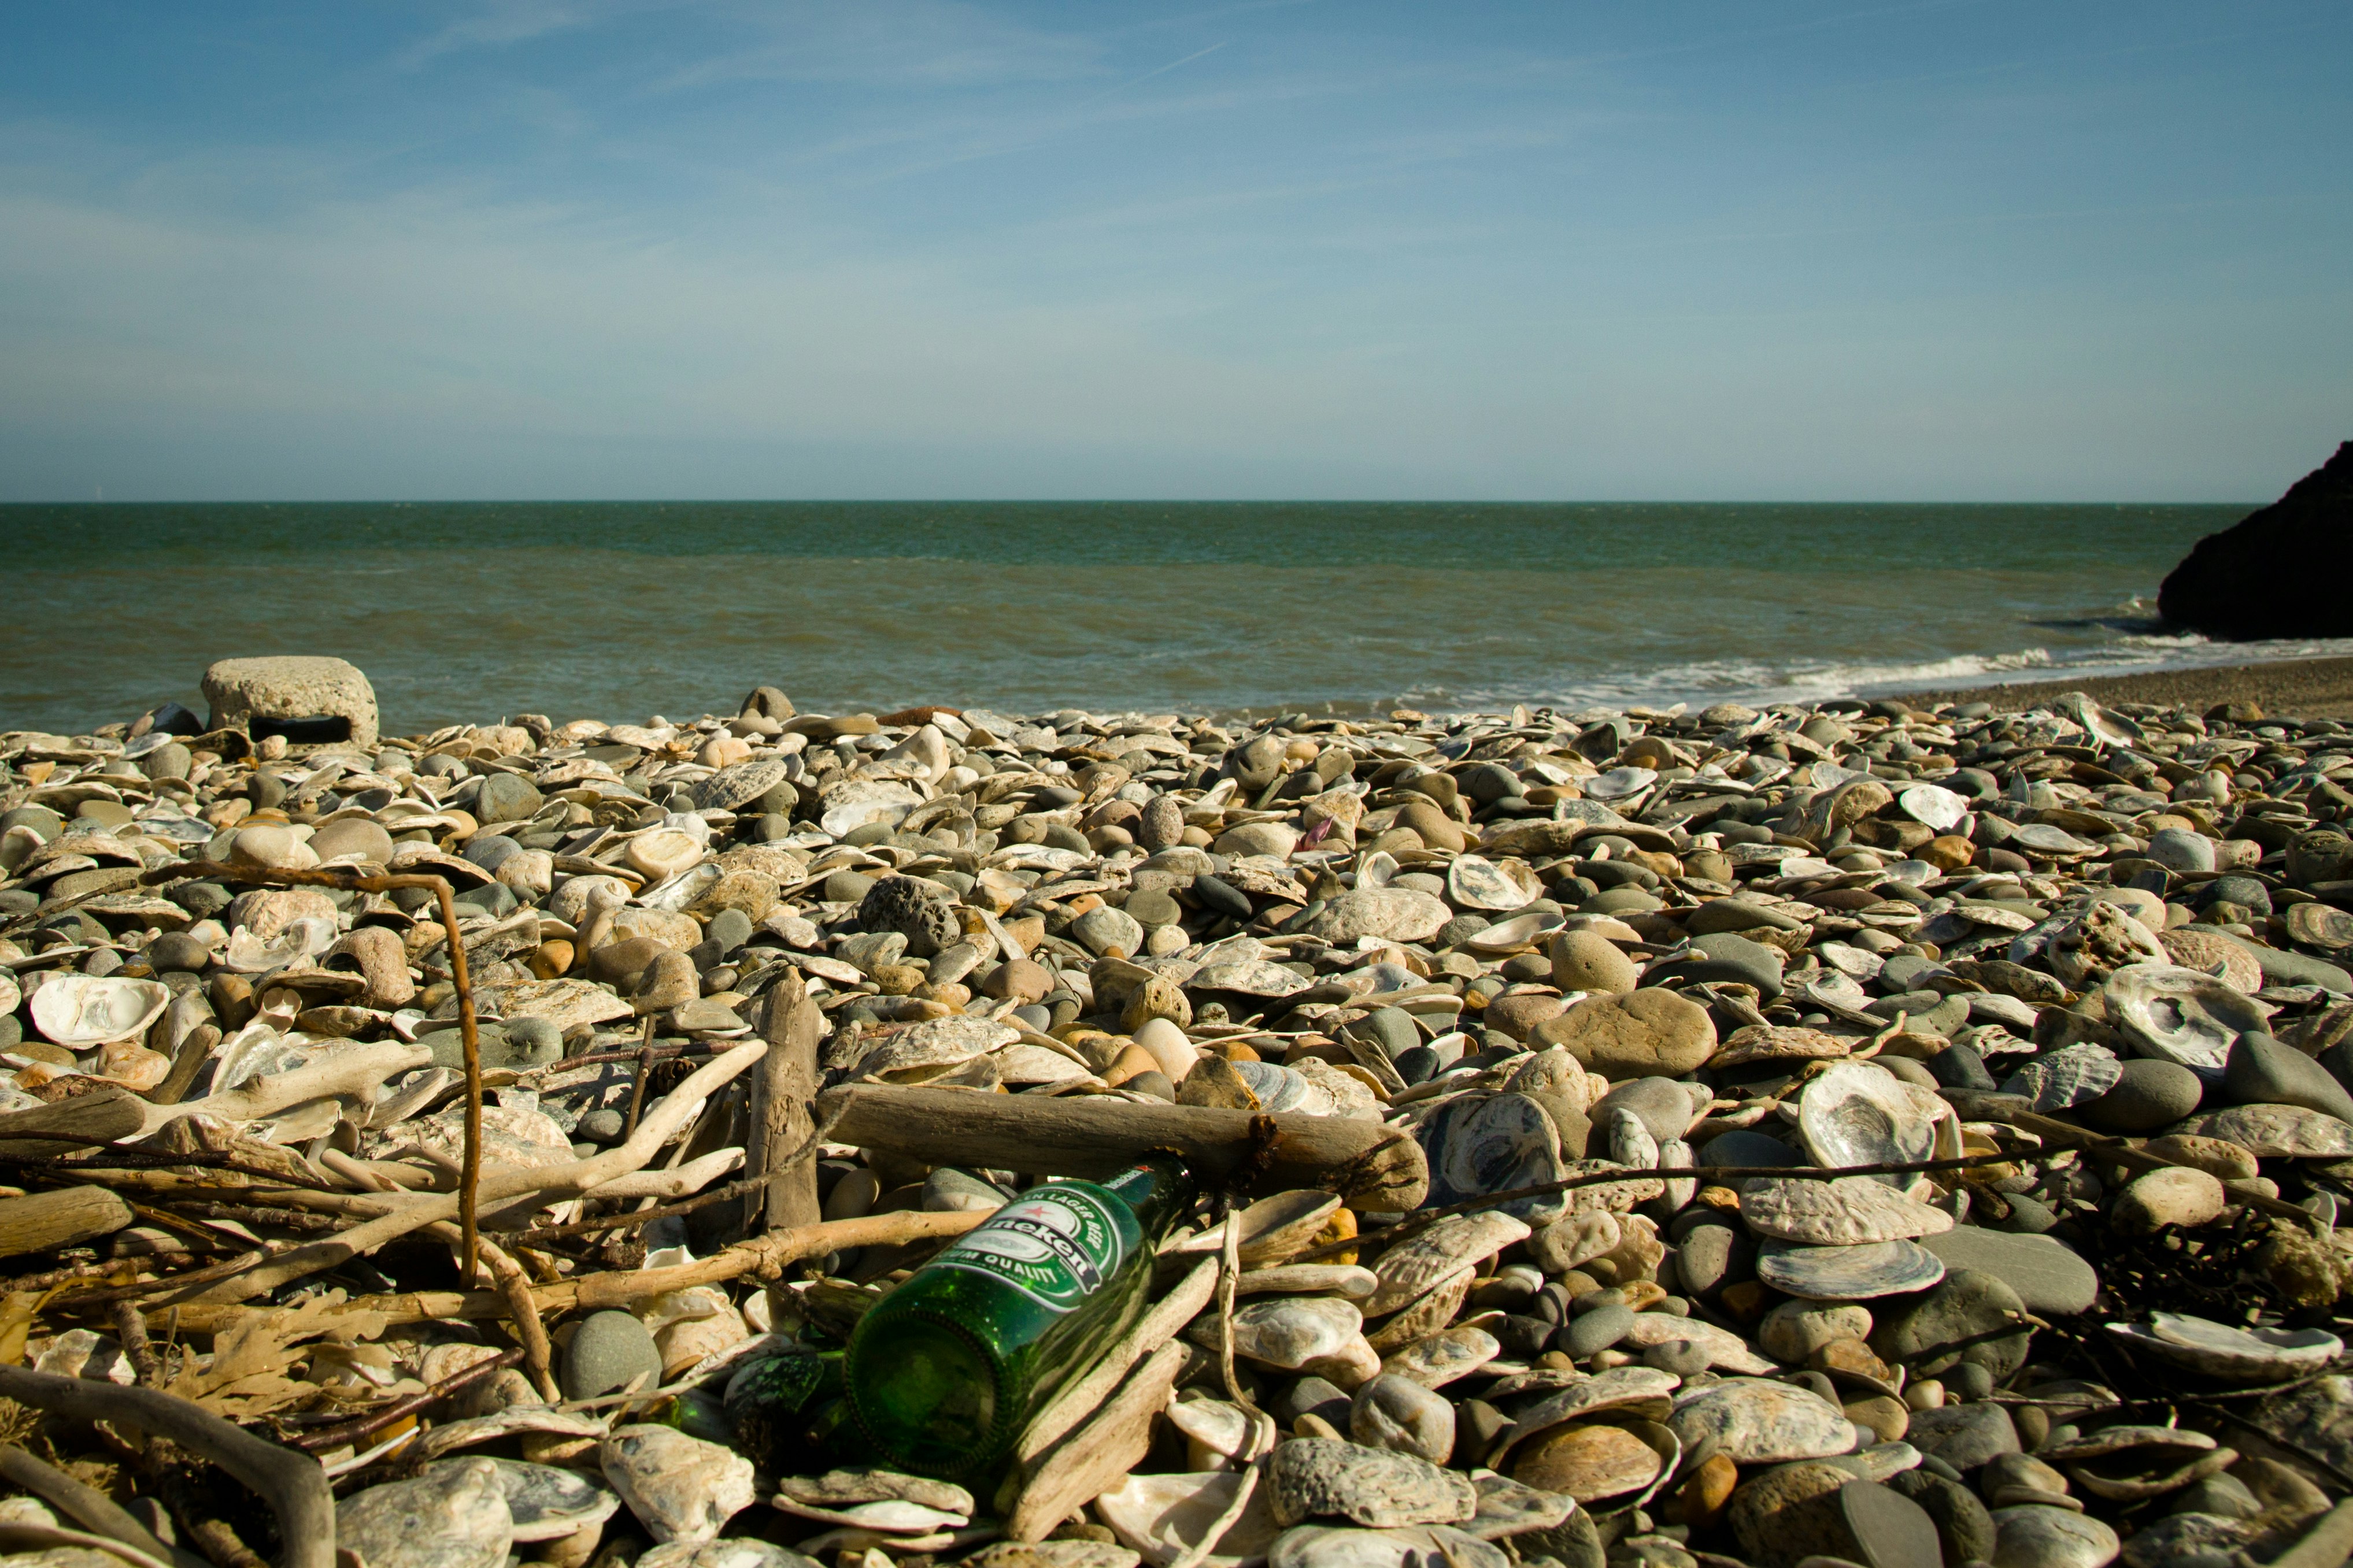 green glass bottle on brown and gray rocks near sea during daytime